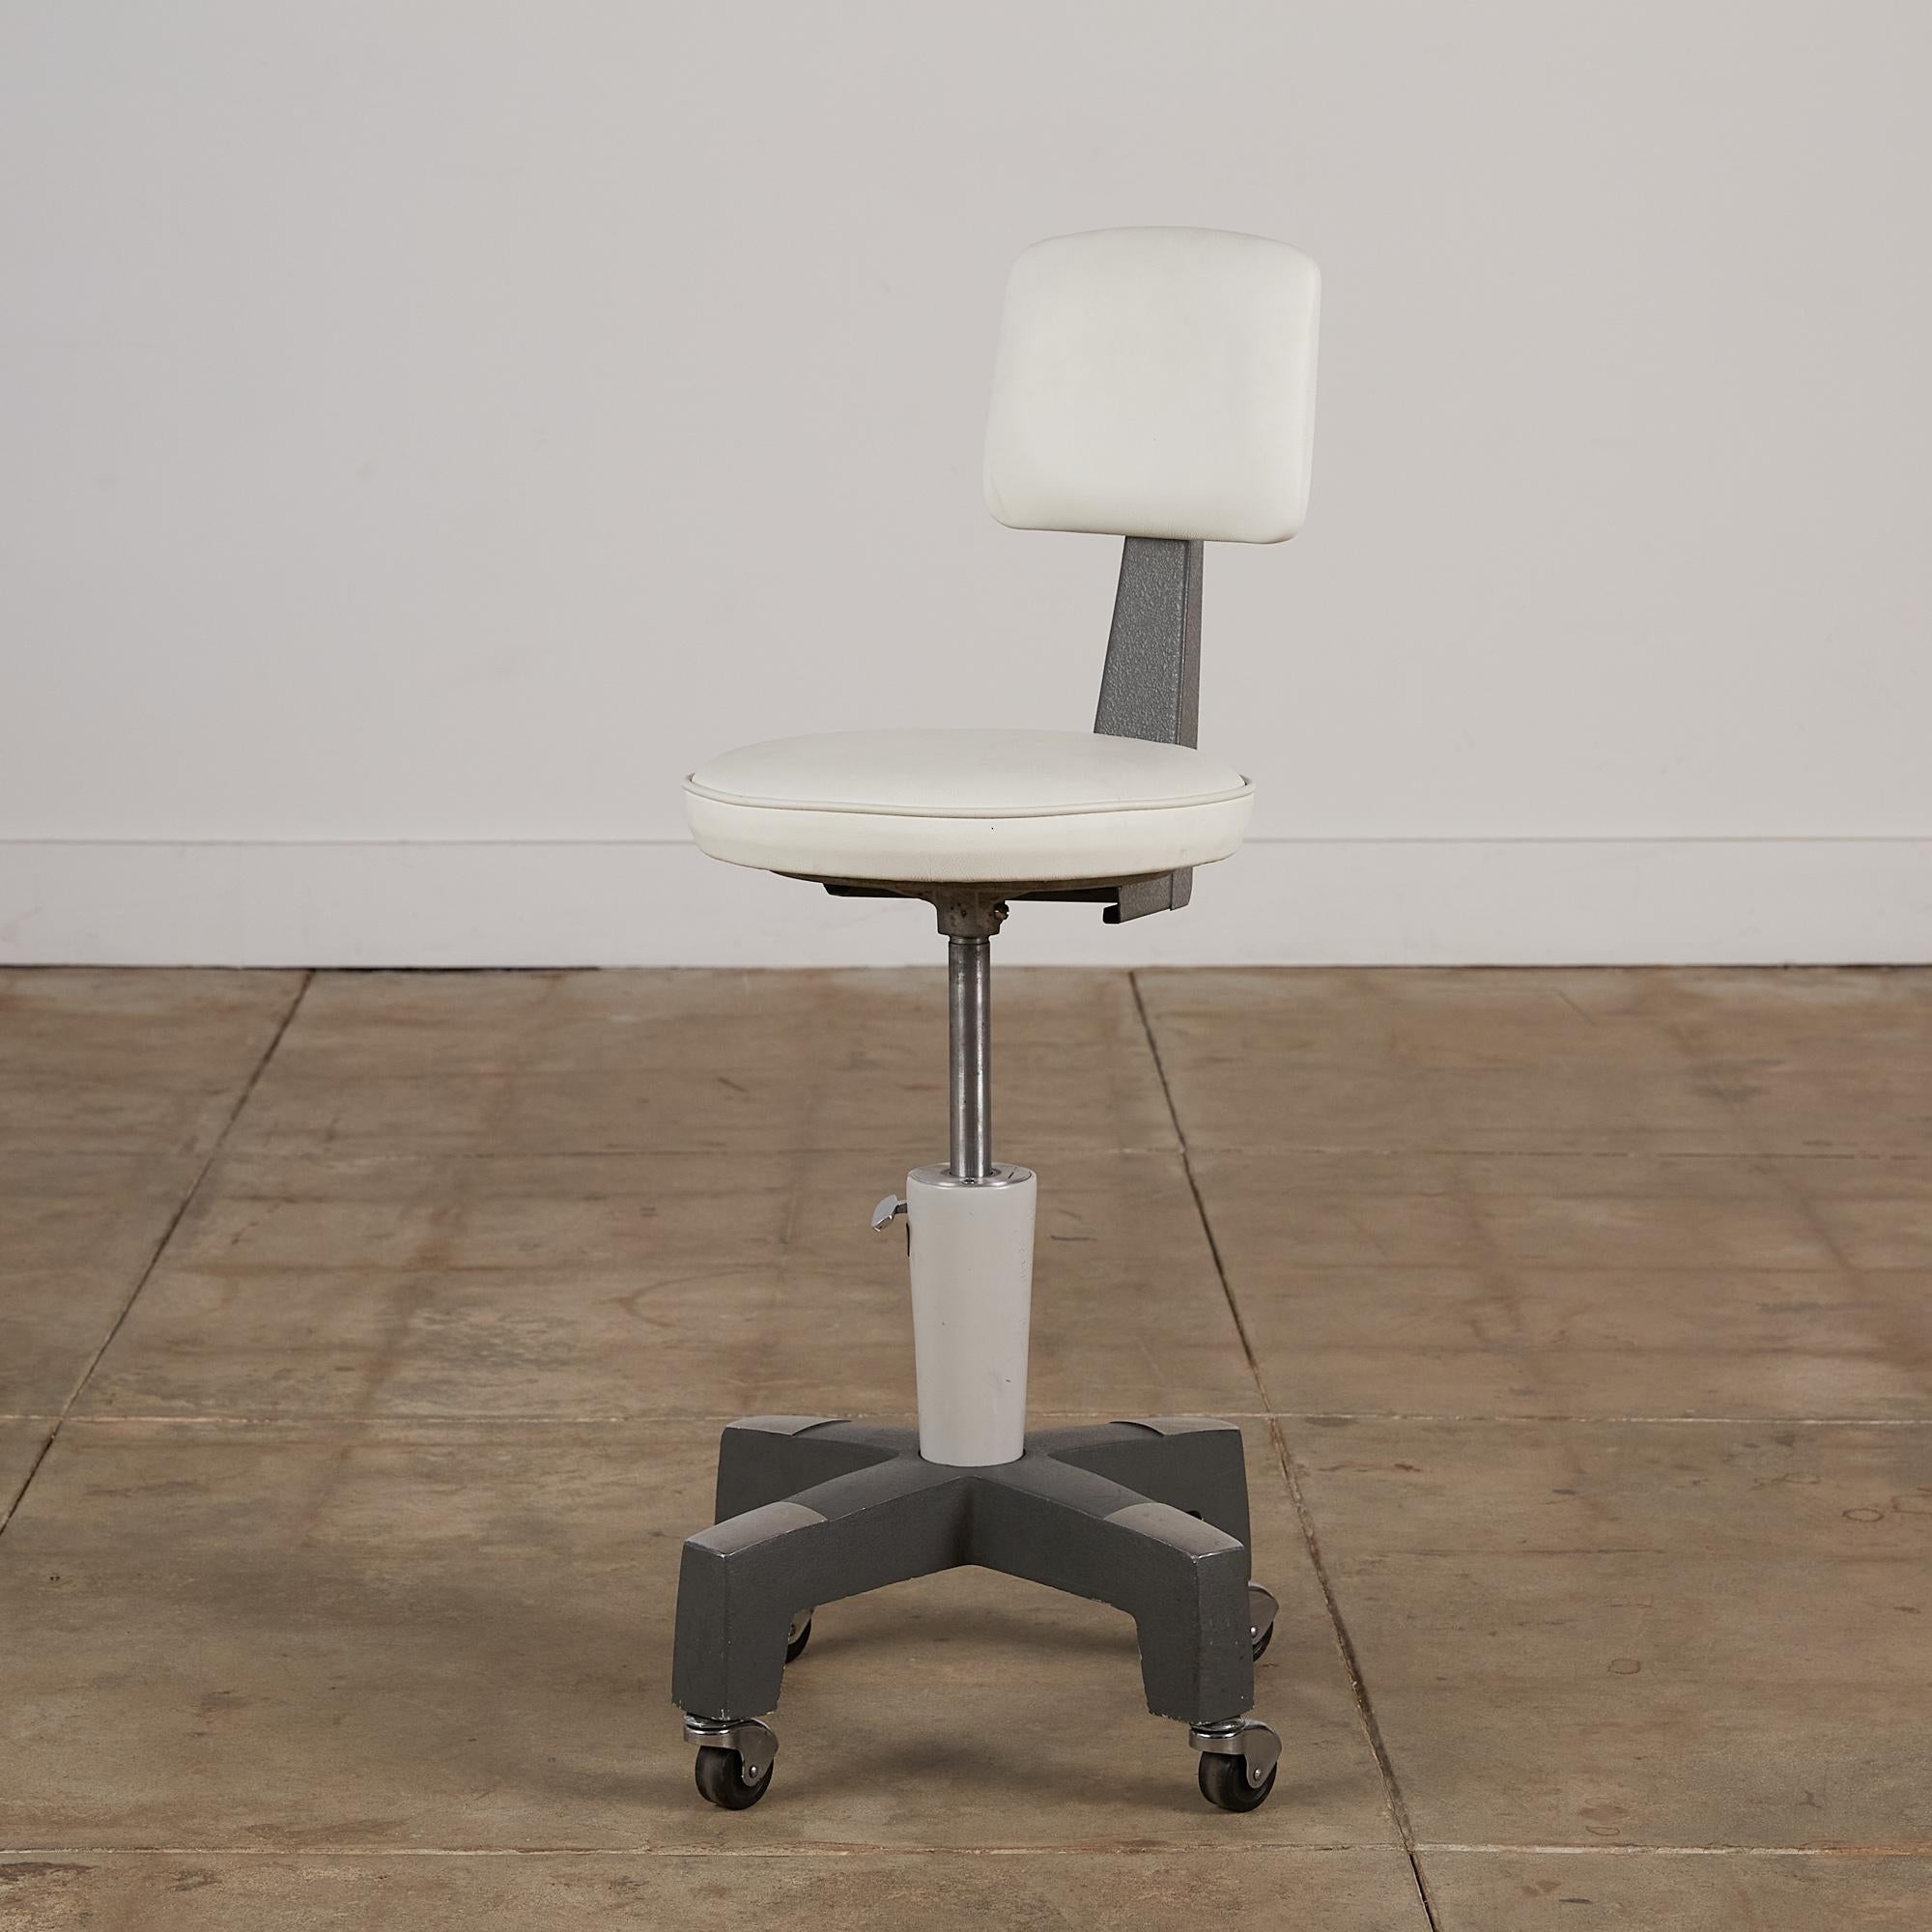 Adjustable stool by American Optical Corp. These stools were given as promotional items to opticians who used American Optical lenses in the glasses they prescribed to patients. It has been restored, with the metal polished and a newly upholstered